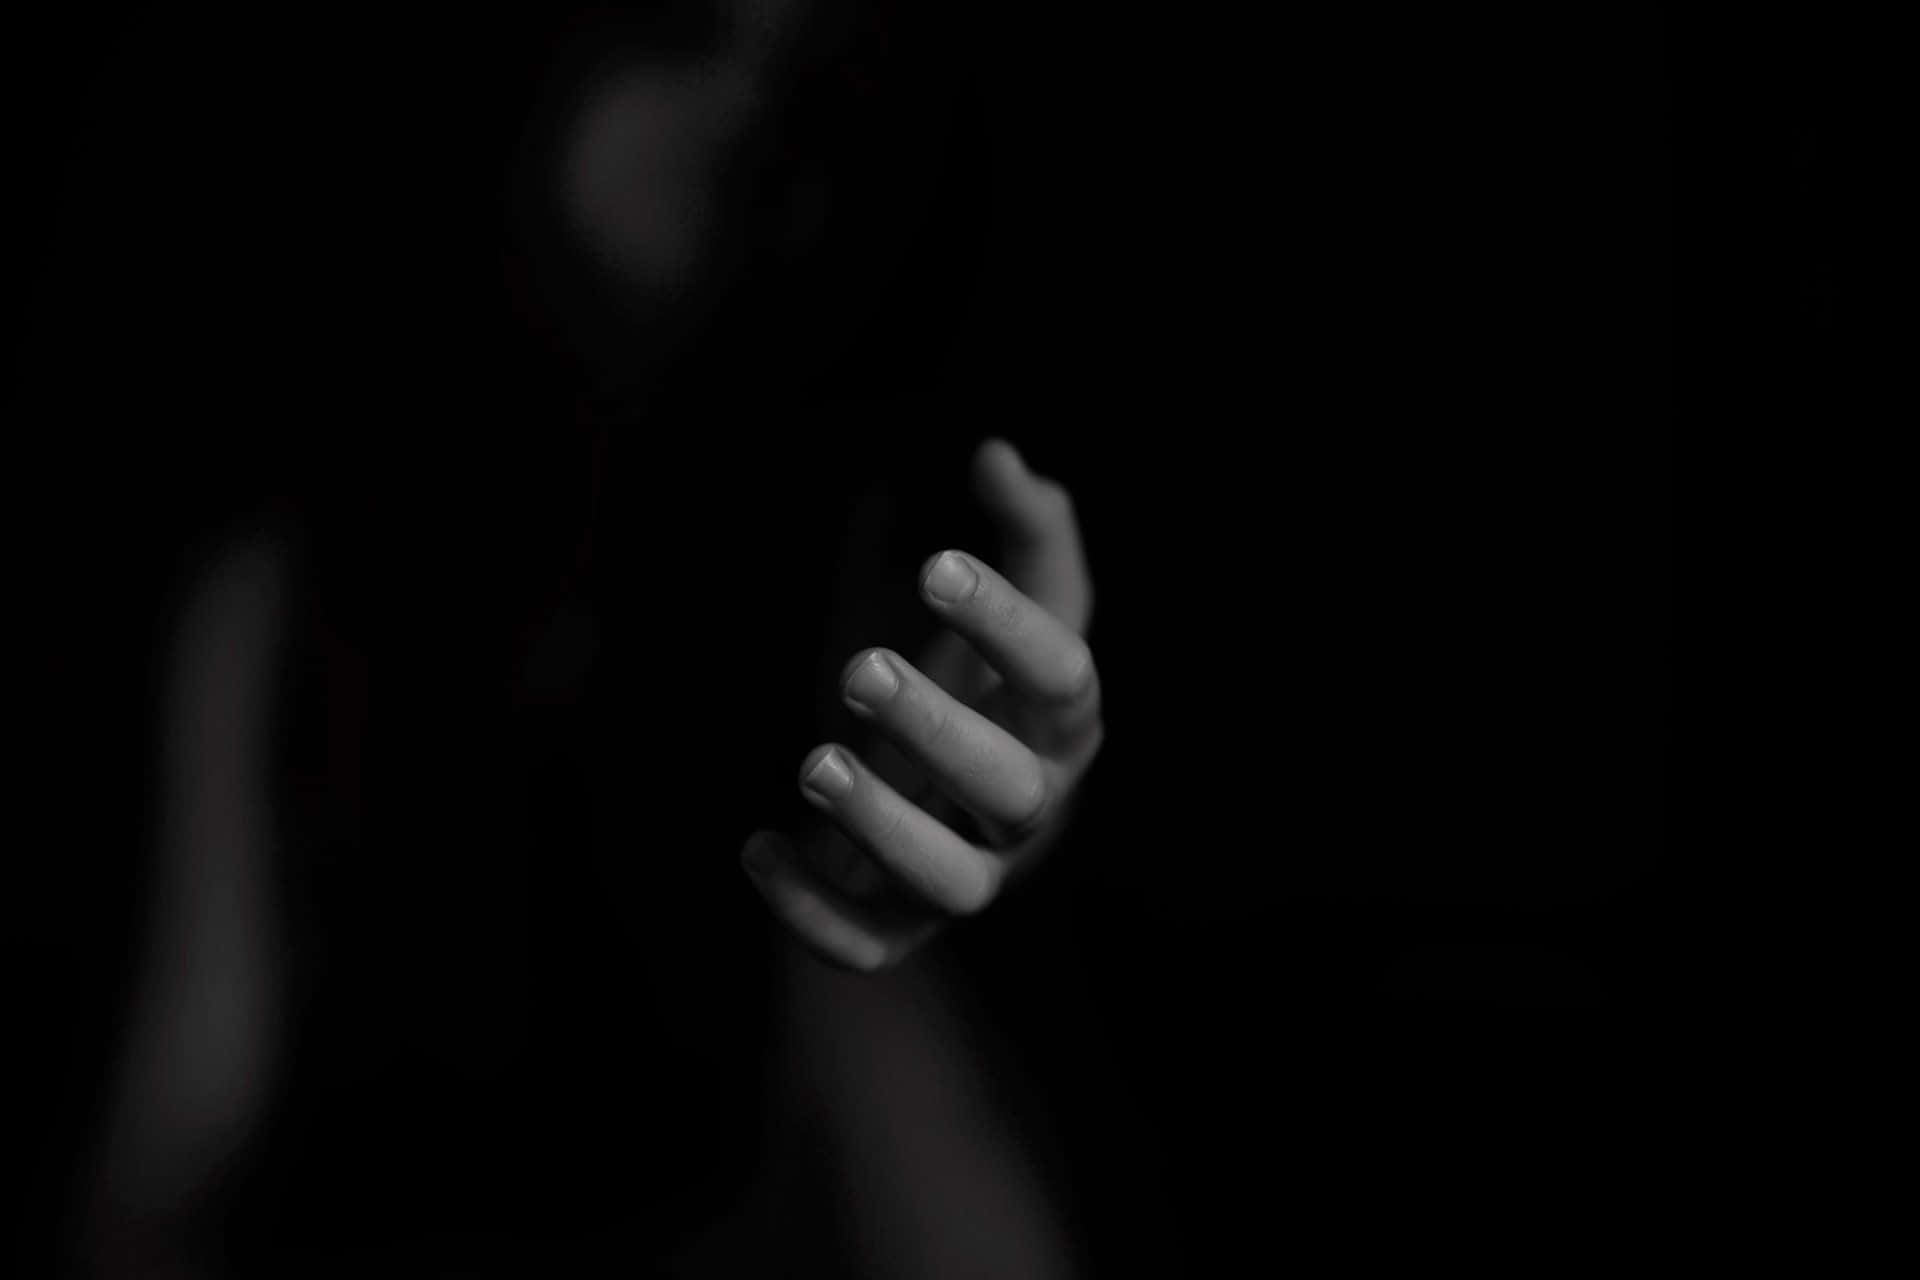 Mysterious Dark Hand reaching out in darkness Wallpaper